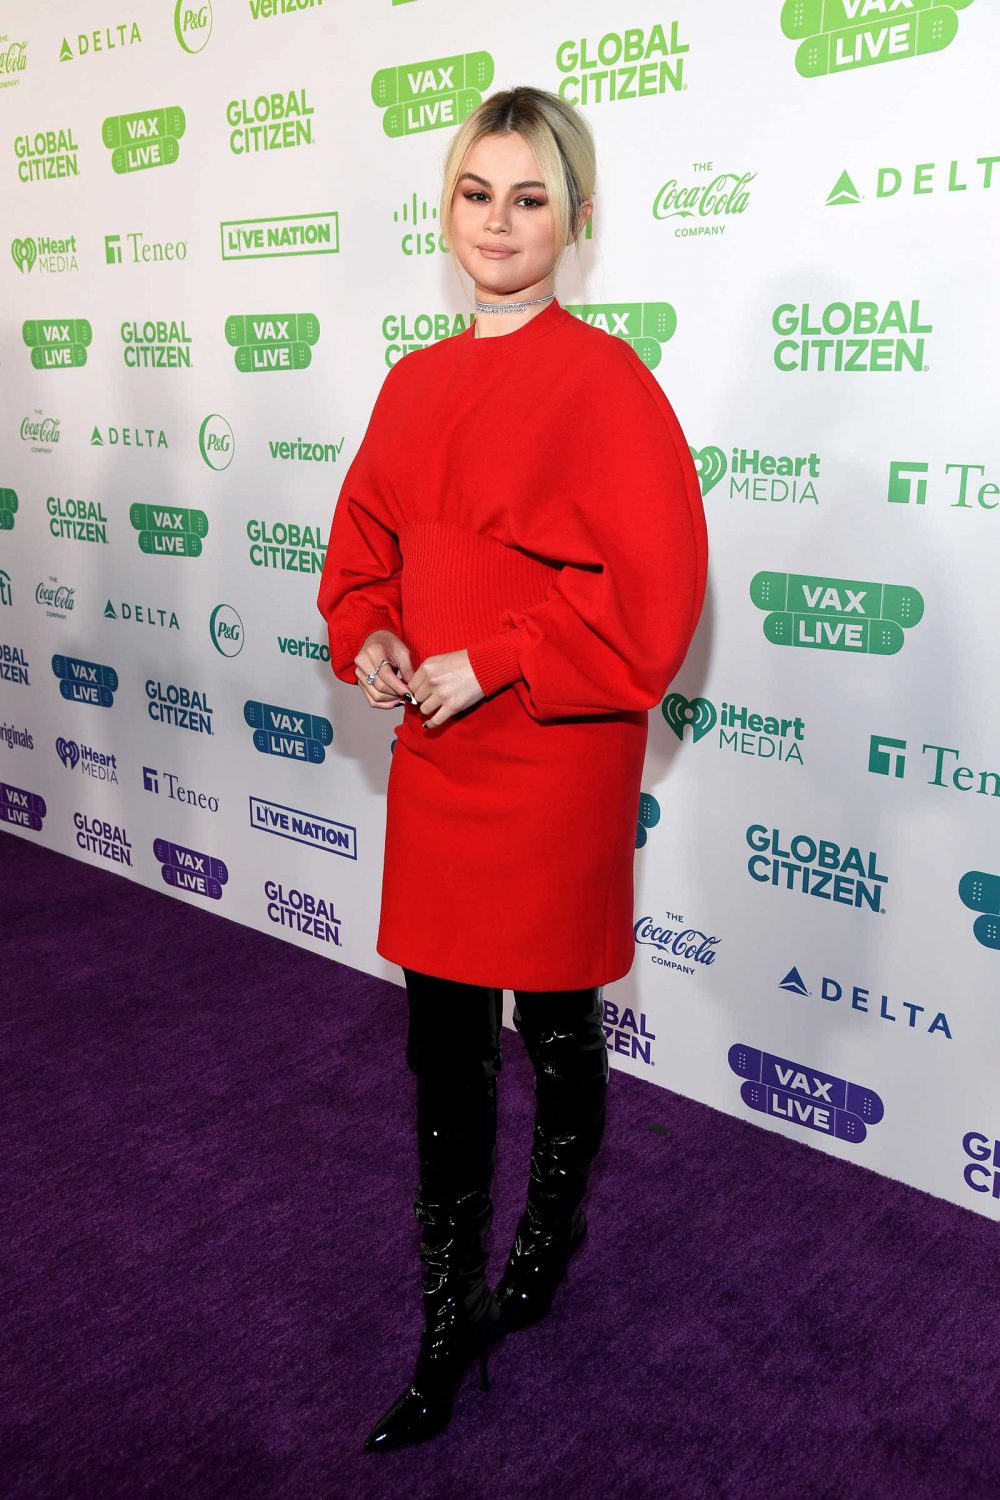 selena gomez attends global citizens event expensive clothes 1